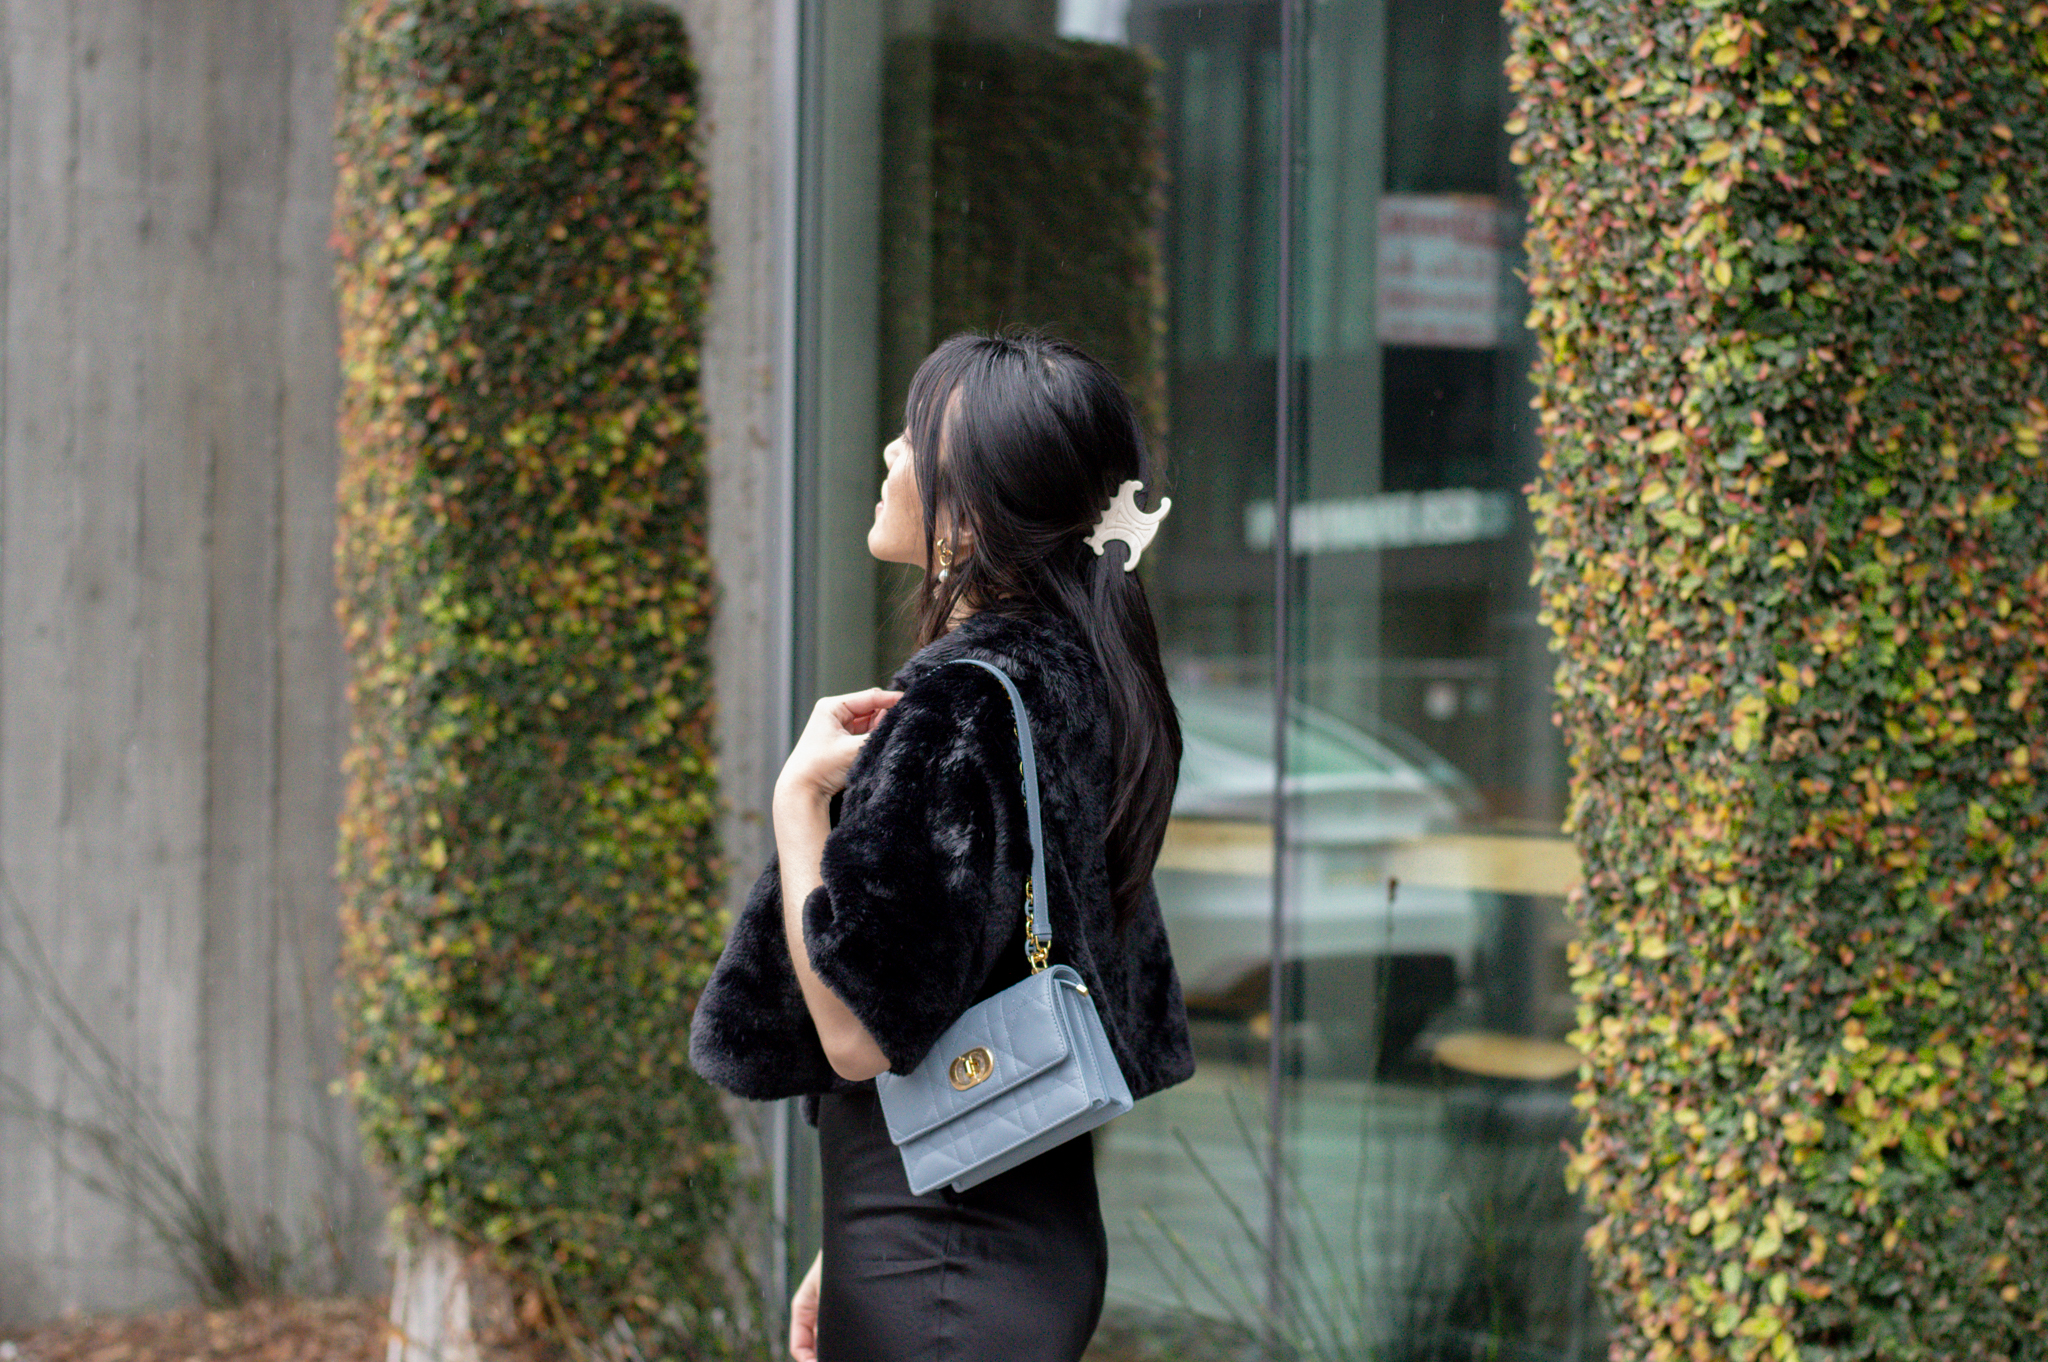 Fashion blogger's stylish ensemble for a night out at Niku Steakhouse in SF